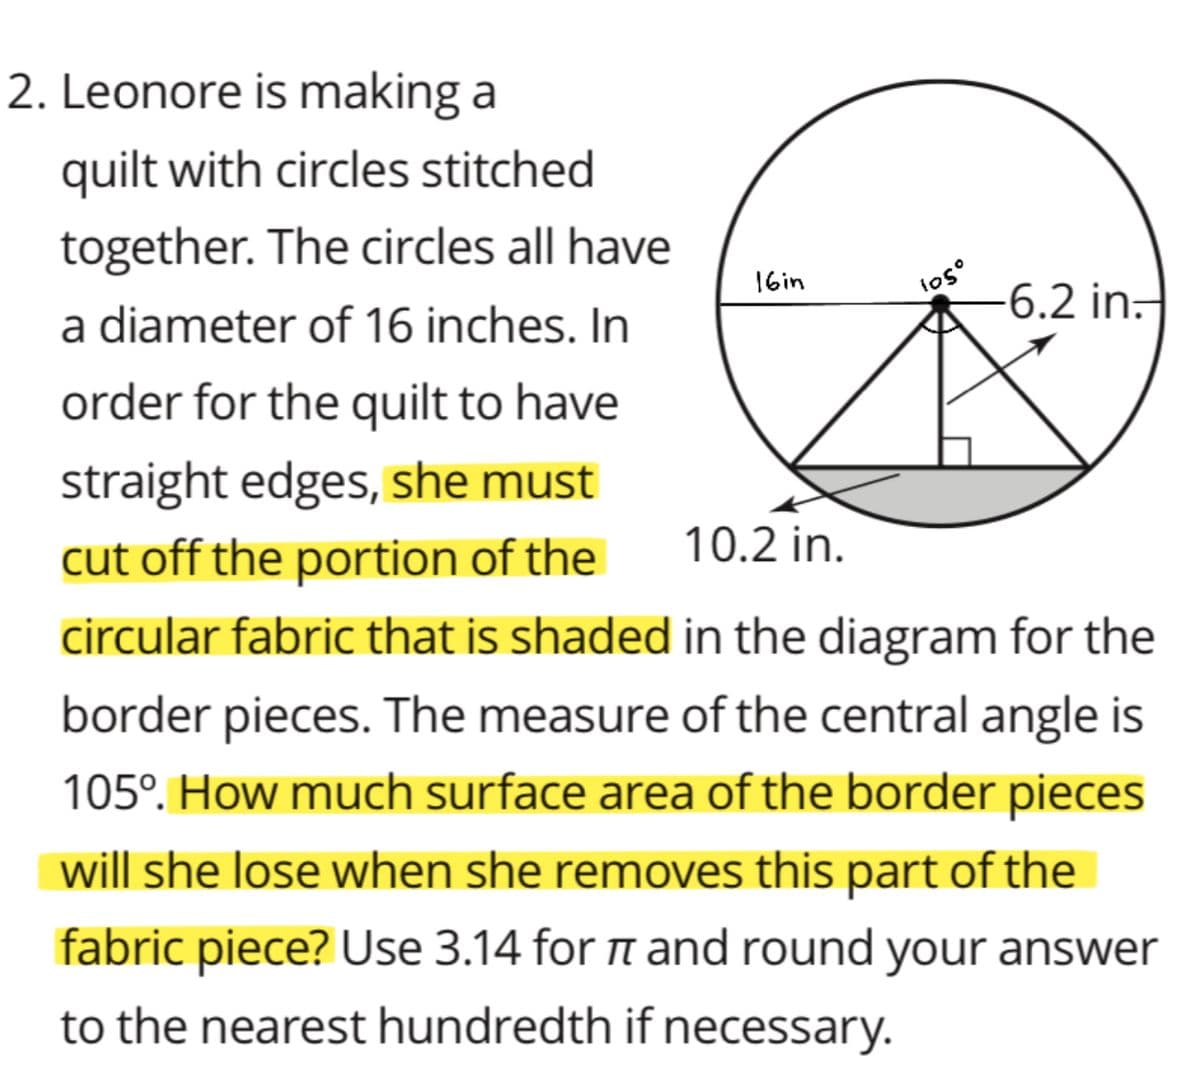 2. Leonore is making a
quilt with circles stitched
together. The circles all have
los
-6.2 in.
16in
a diameter of 16 inches. In
order for the quilt to have
straight edges, she must
cut off the portion of the
10.2 in.
circular fabric that is shaded in the diagram for the
border pieces. The measure of the central angle is
105°. How much surface area of the border pieces
will she lose when she removes this part of the
fabric piece? Use 3.14 for n and round your answer
to the nearest hundredth if necessary.
